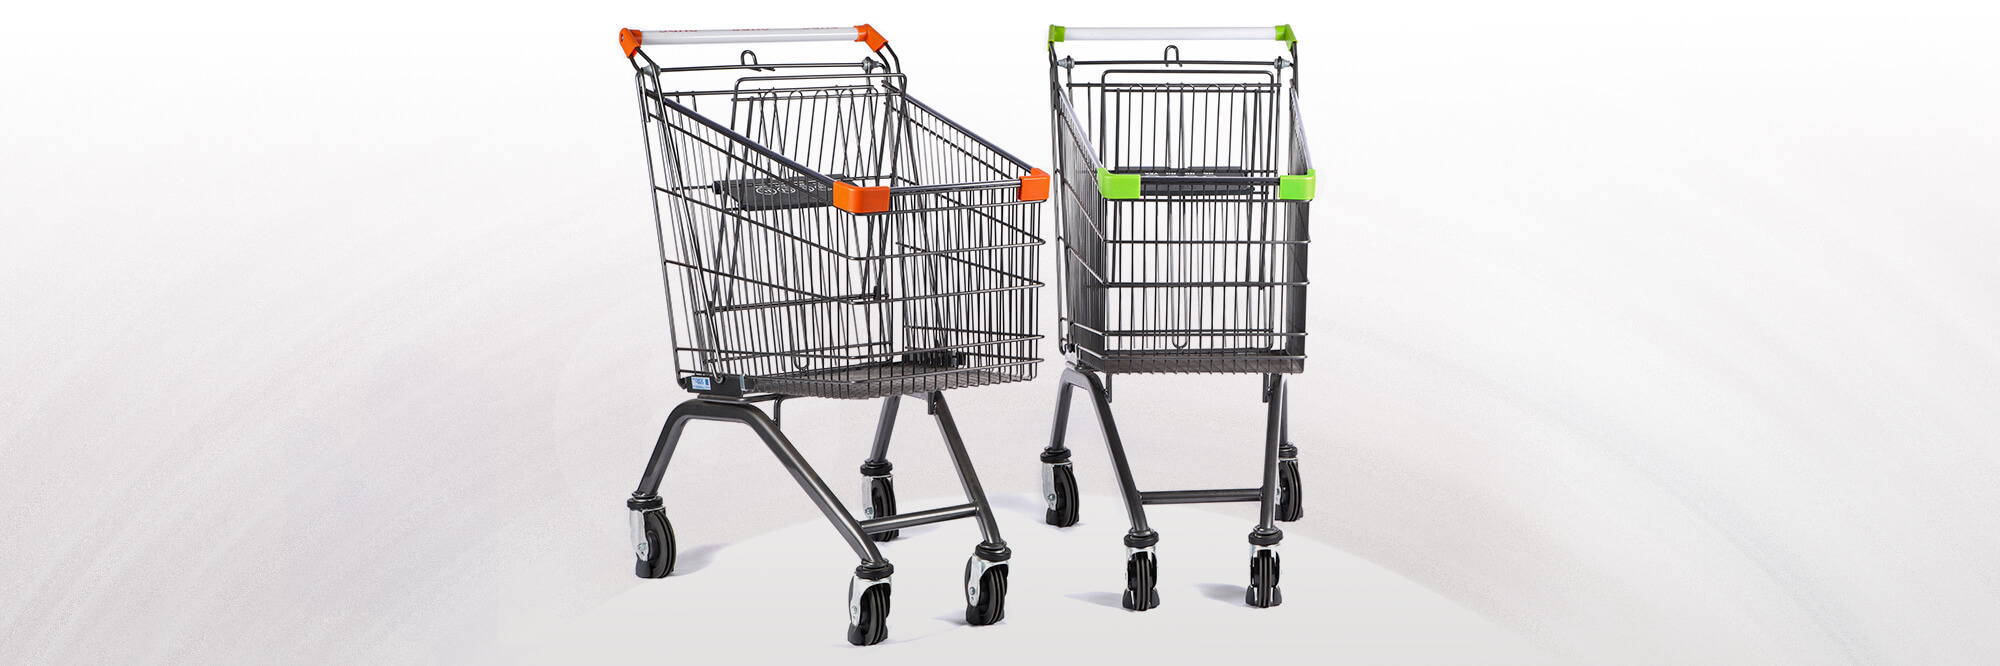 shopping trolleys for sale